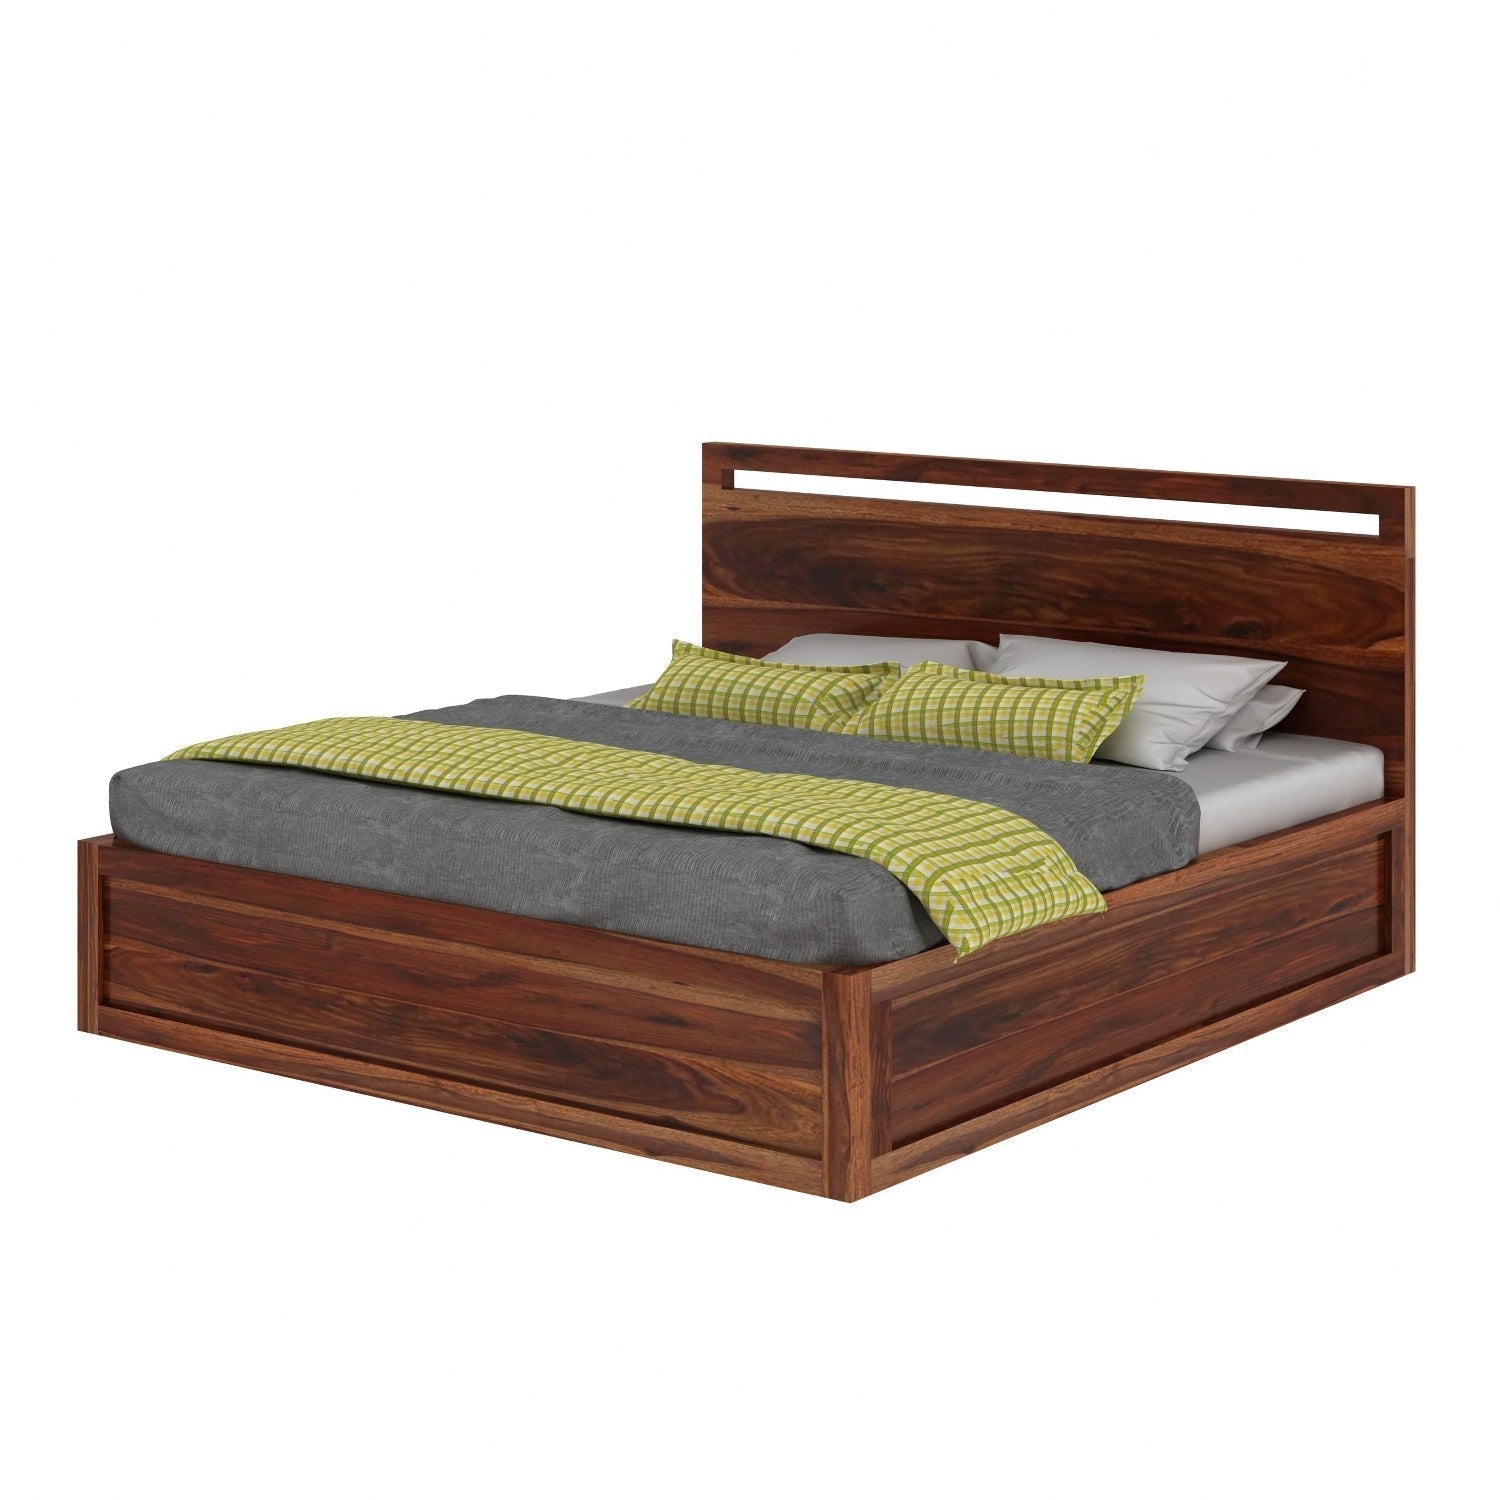 Livinn Solid Sheesham Wood Hydraulic Bed With Box Storage (Queen Size, Natural Finish)